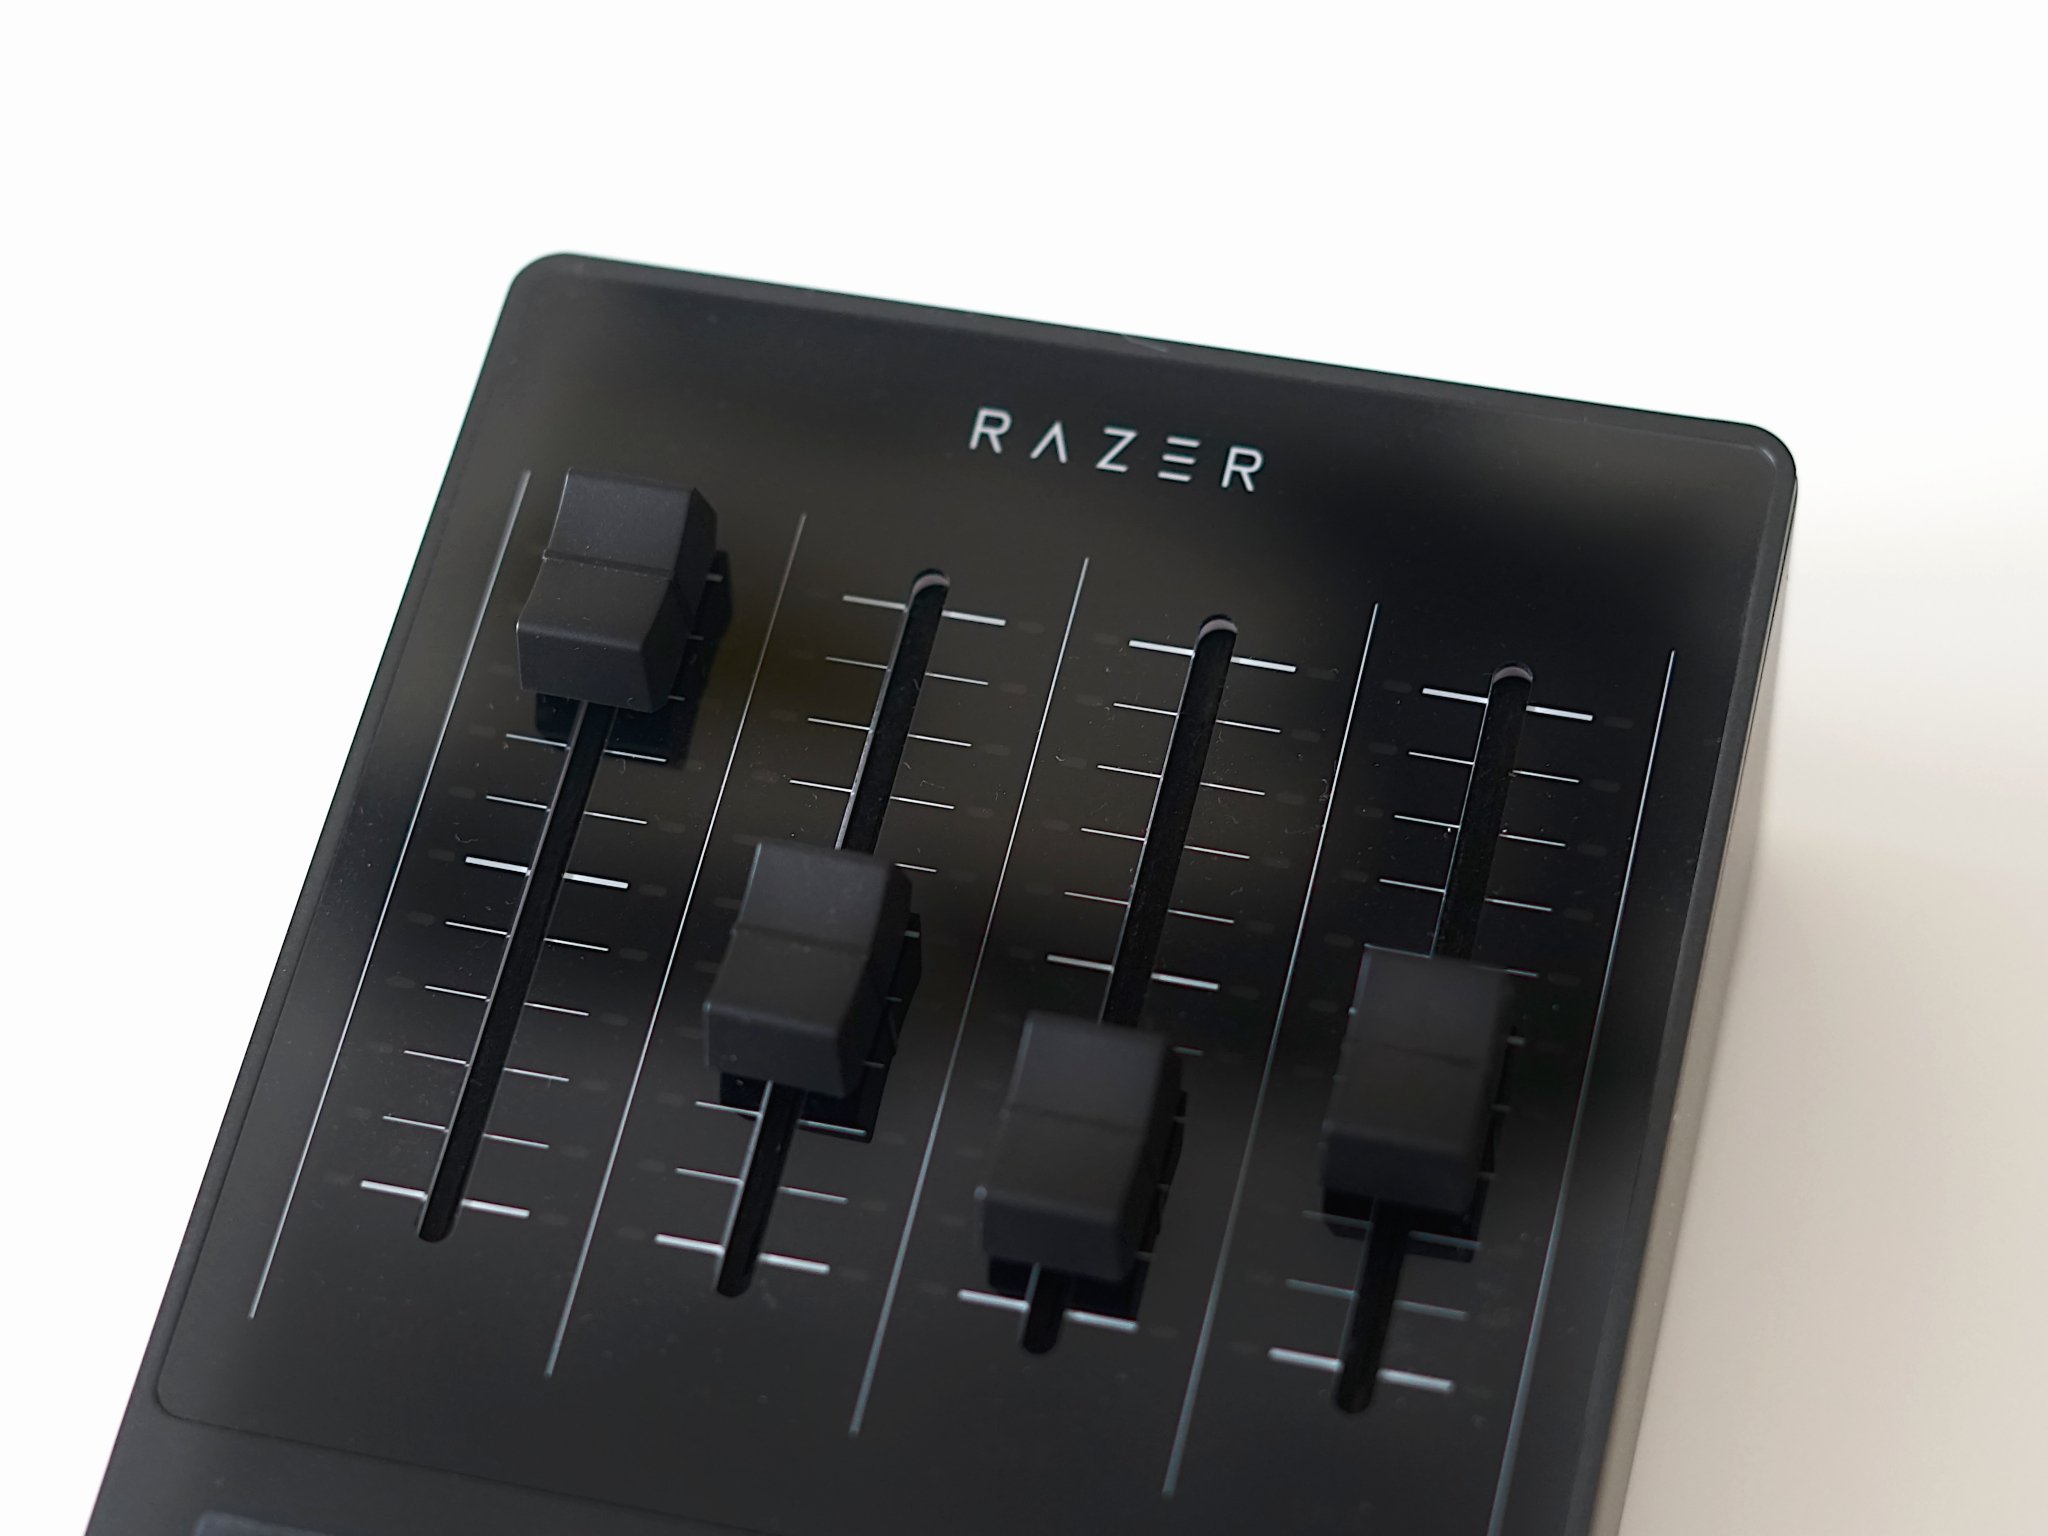 Razer Audio Mixer review: The companion you didn't know you needed